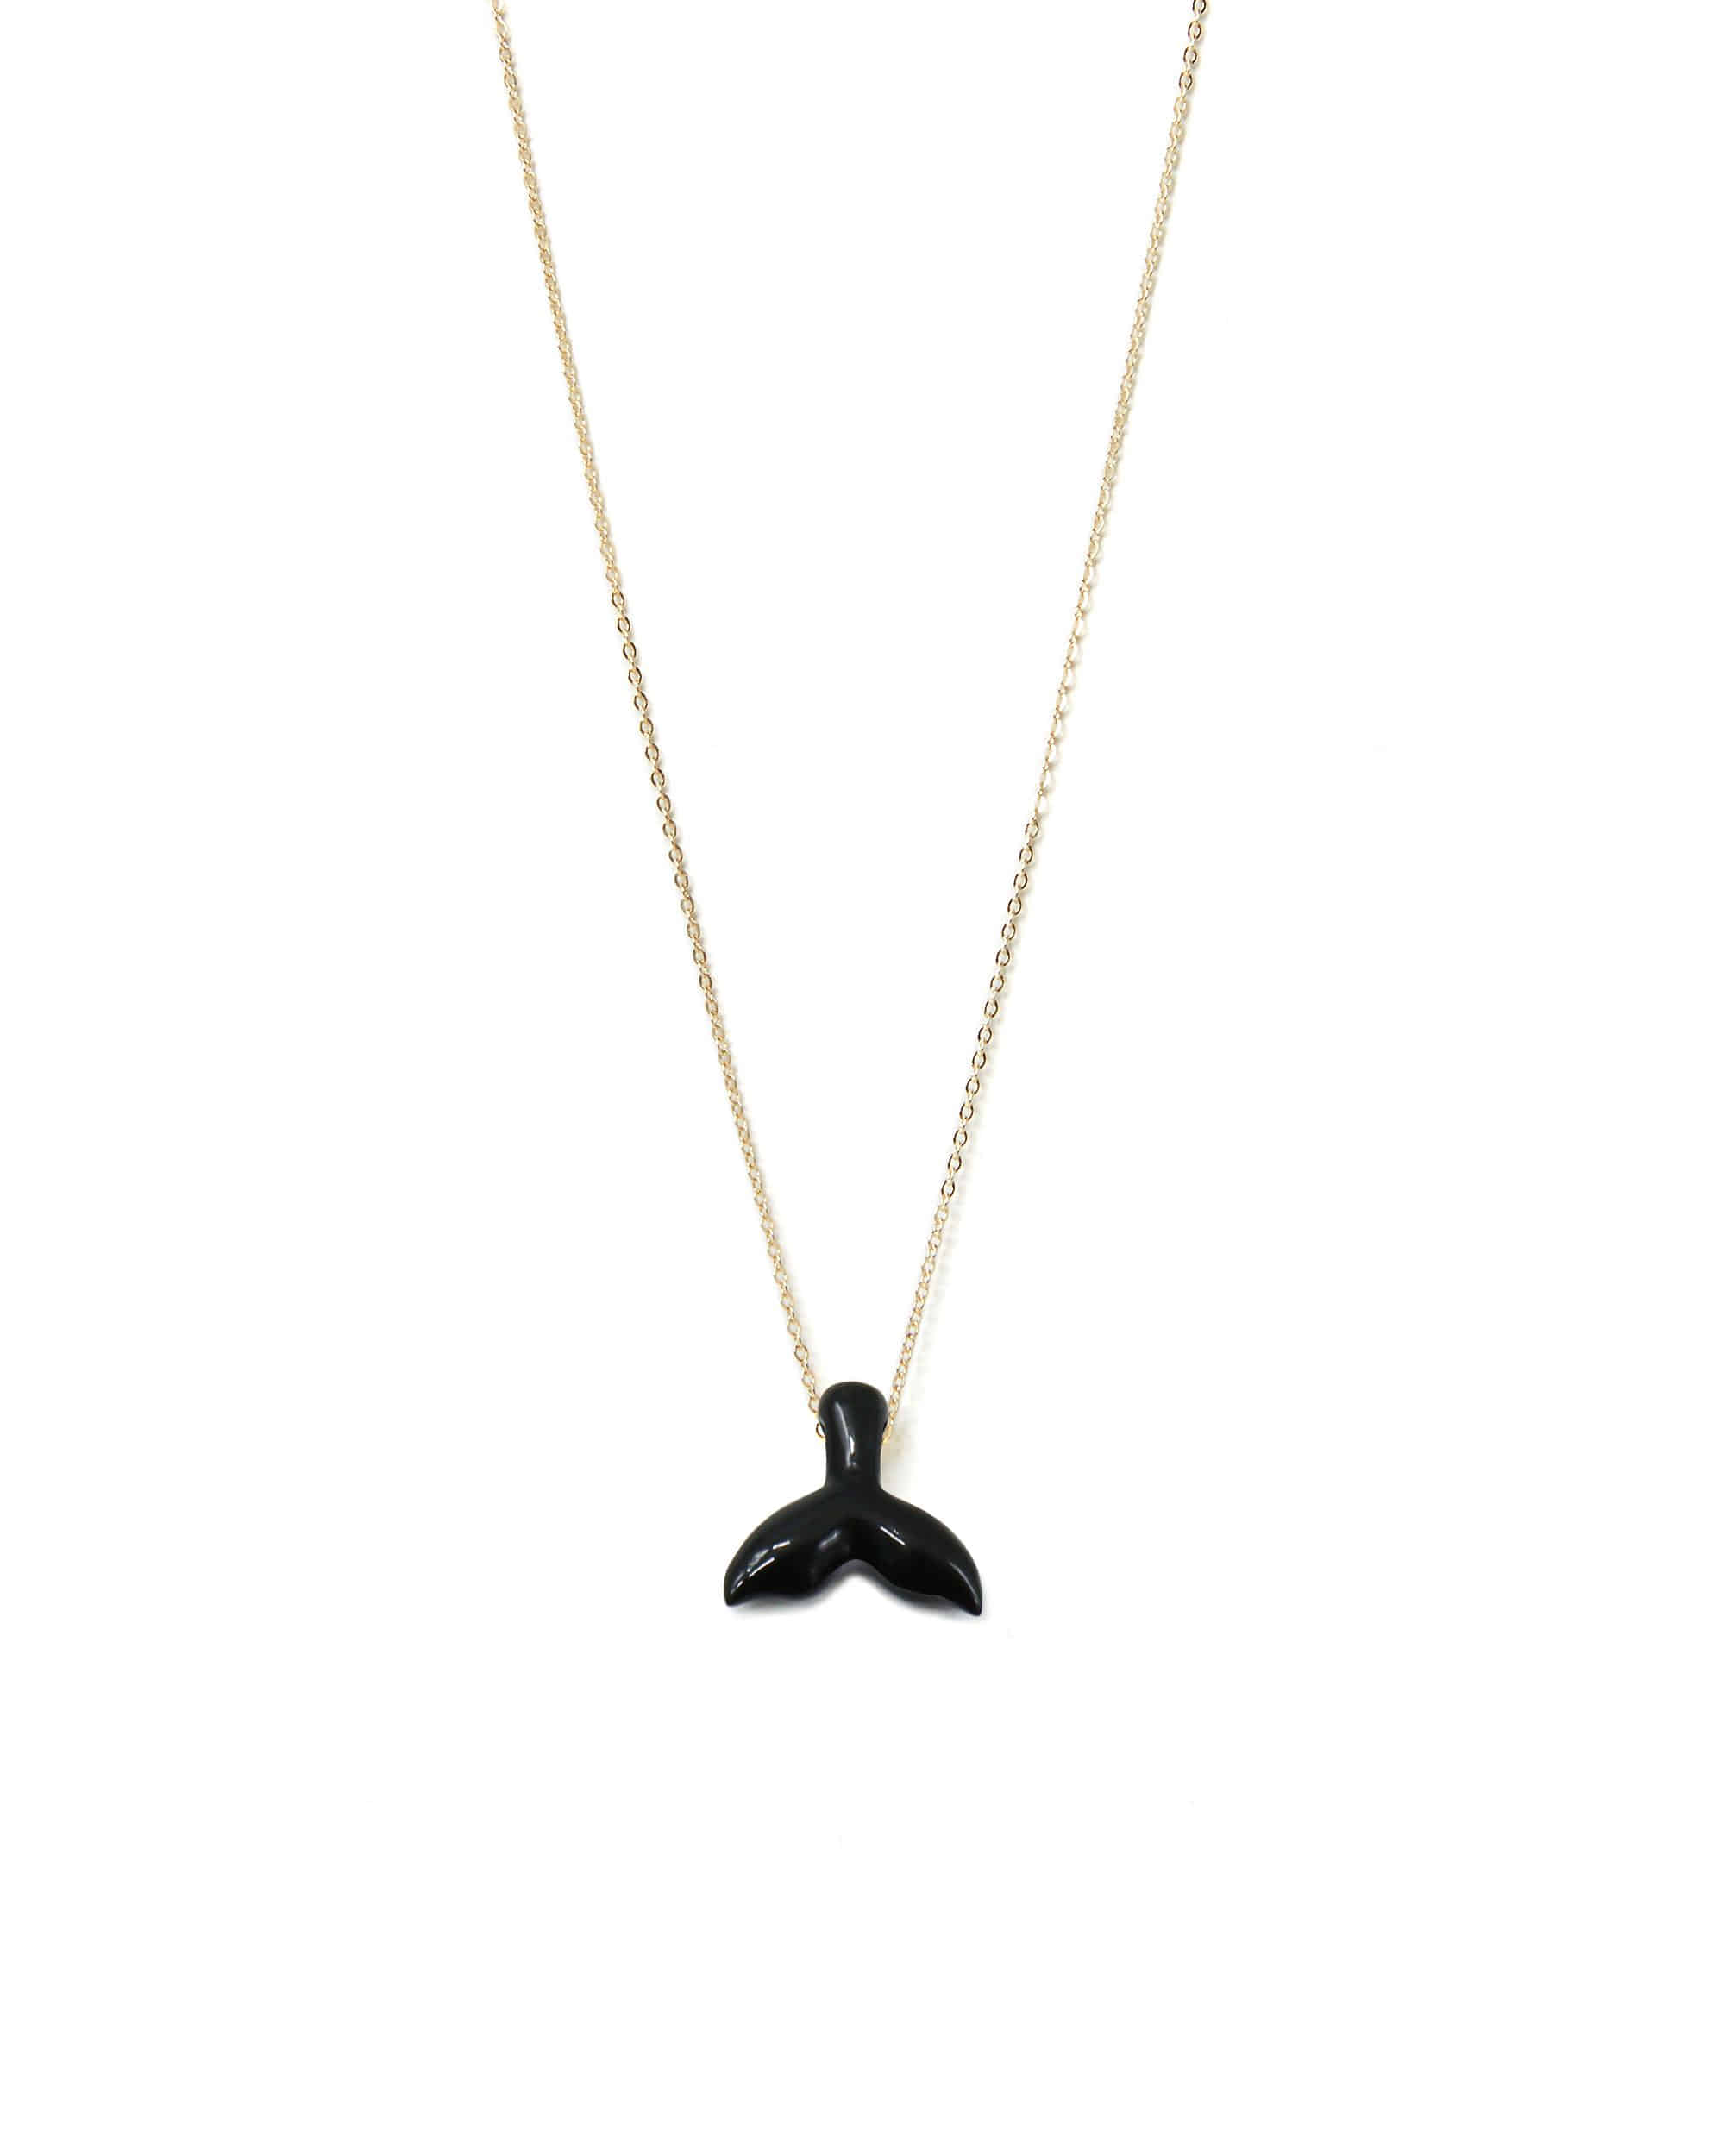 Dolphin Tail Onyx Necklace